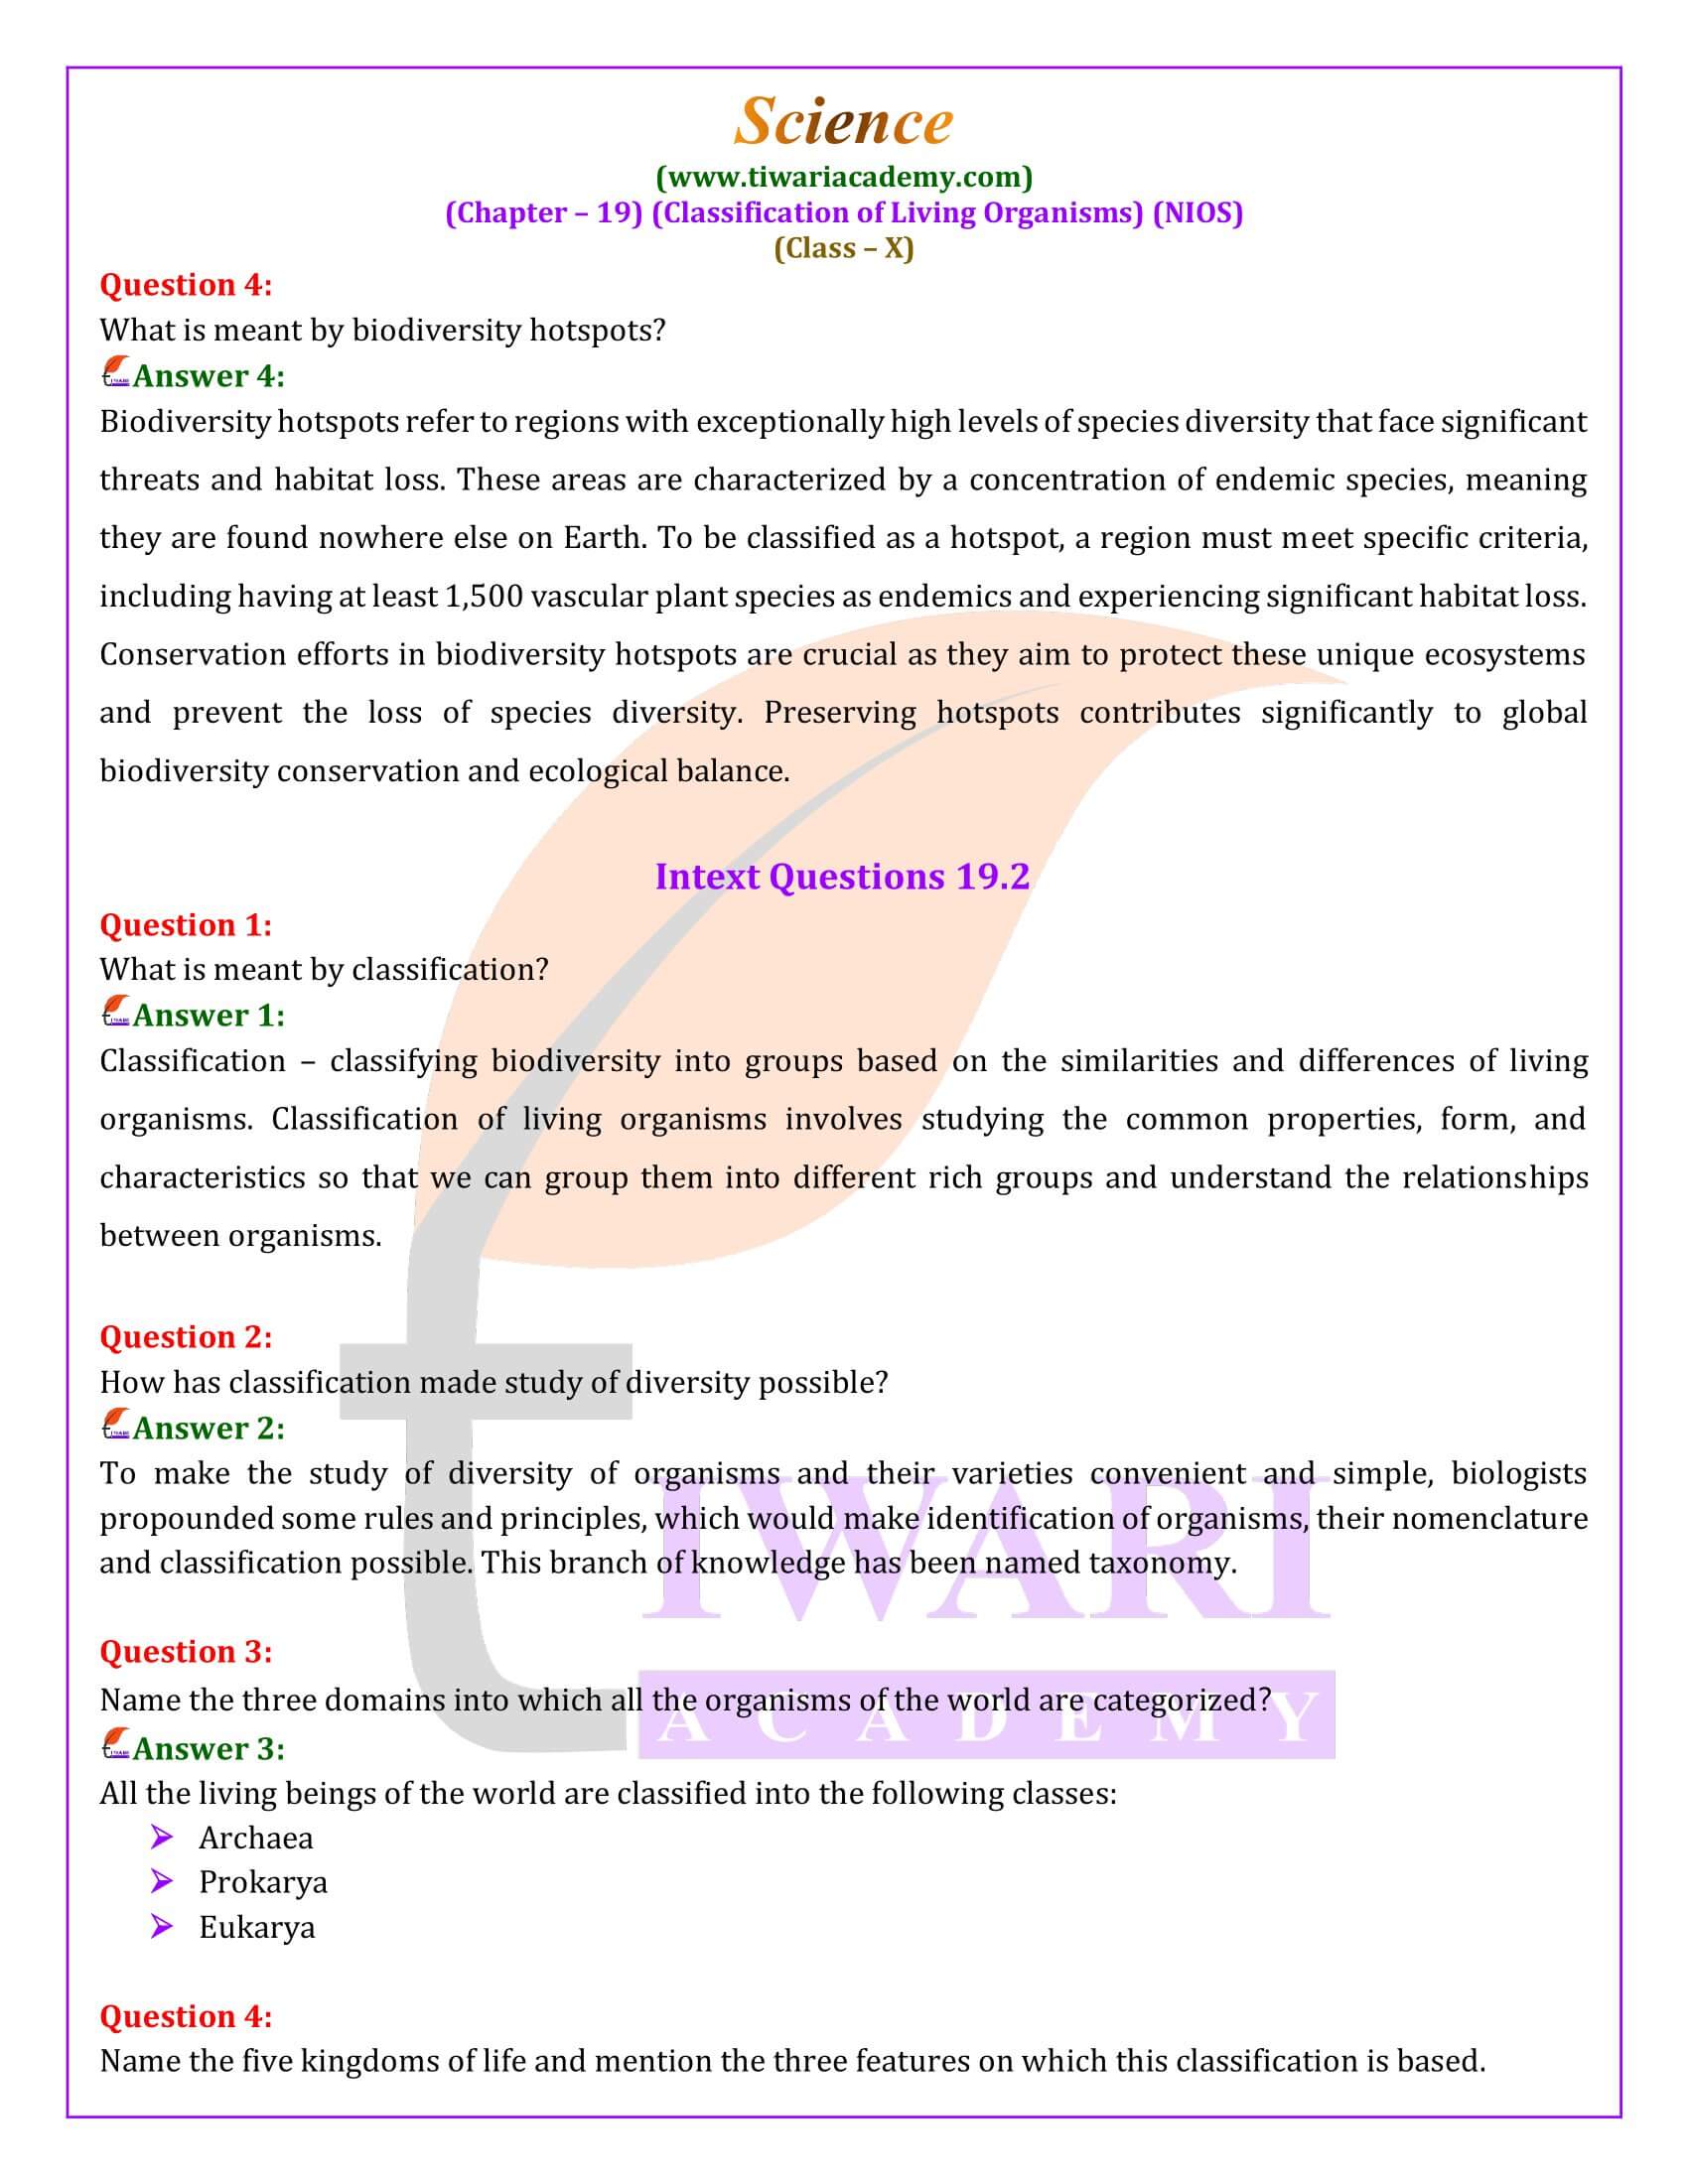 NIOS Class 10 Science Chapter 19 Classification of Living Organisms Answers